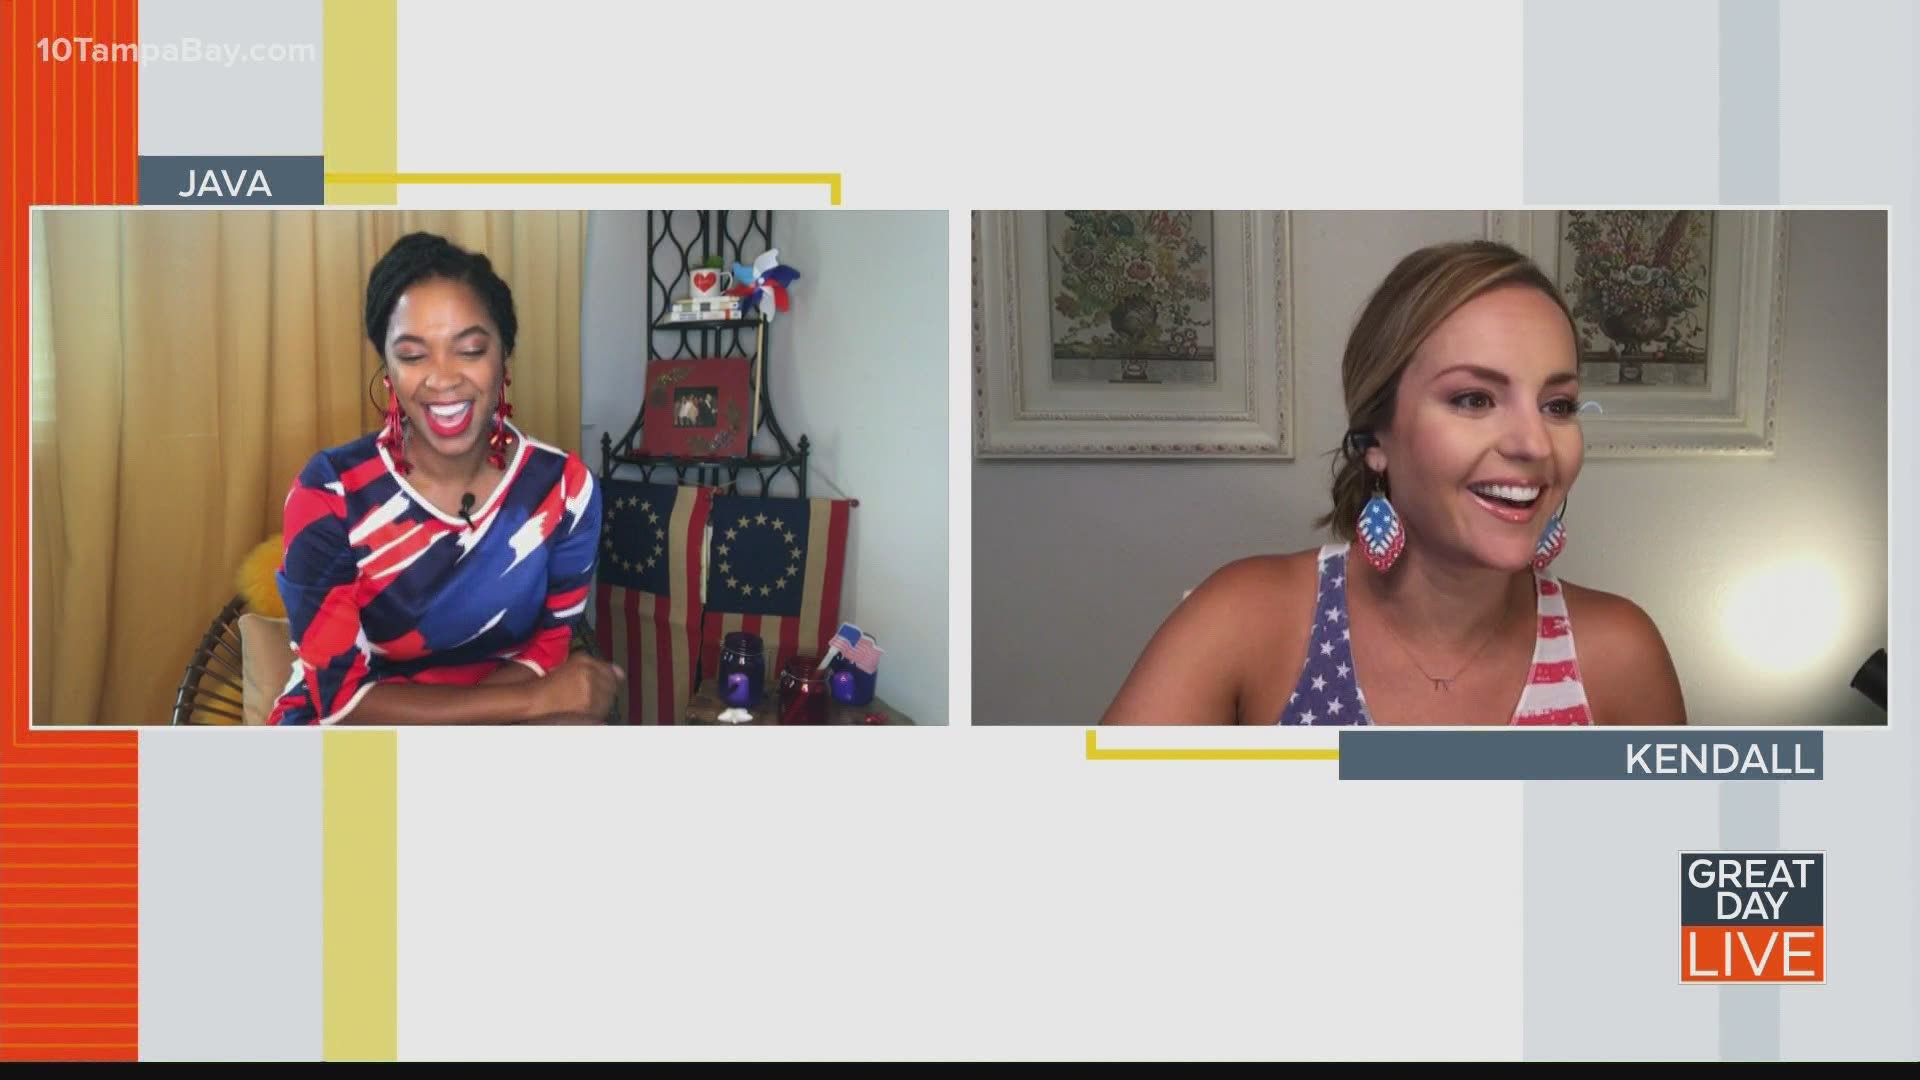 Kendall and Java put their skills to the test by playing an Independence Day trivia game.